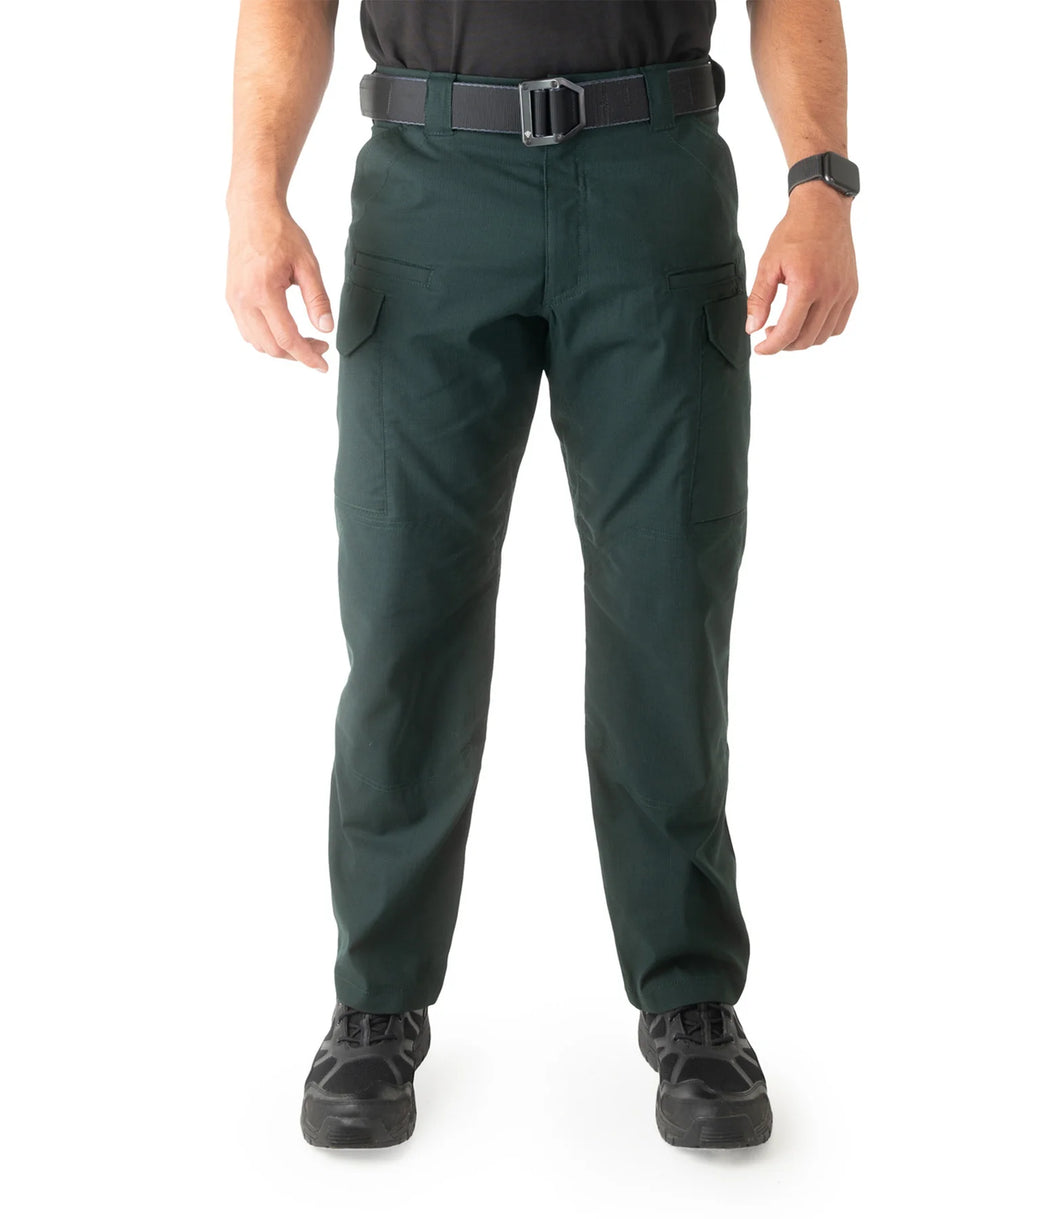 First Tactical Men's V2 Tactical Pants Spruce Green